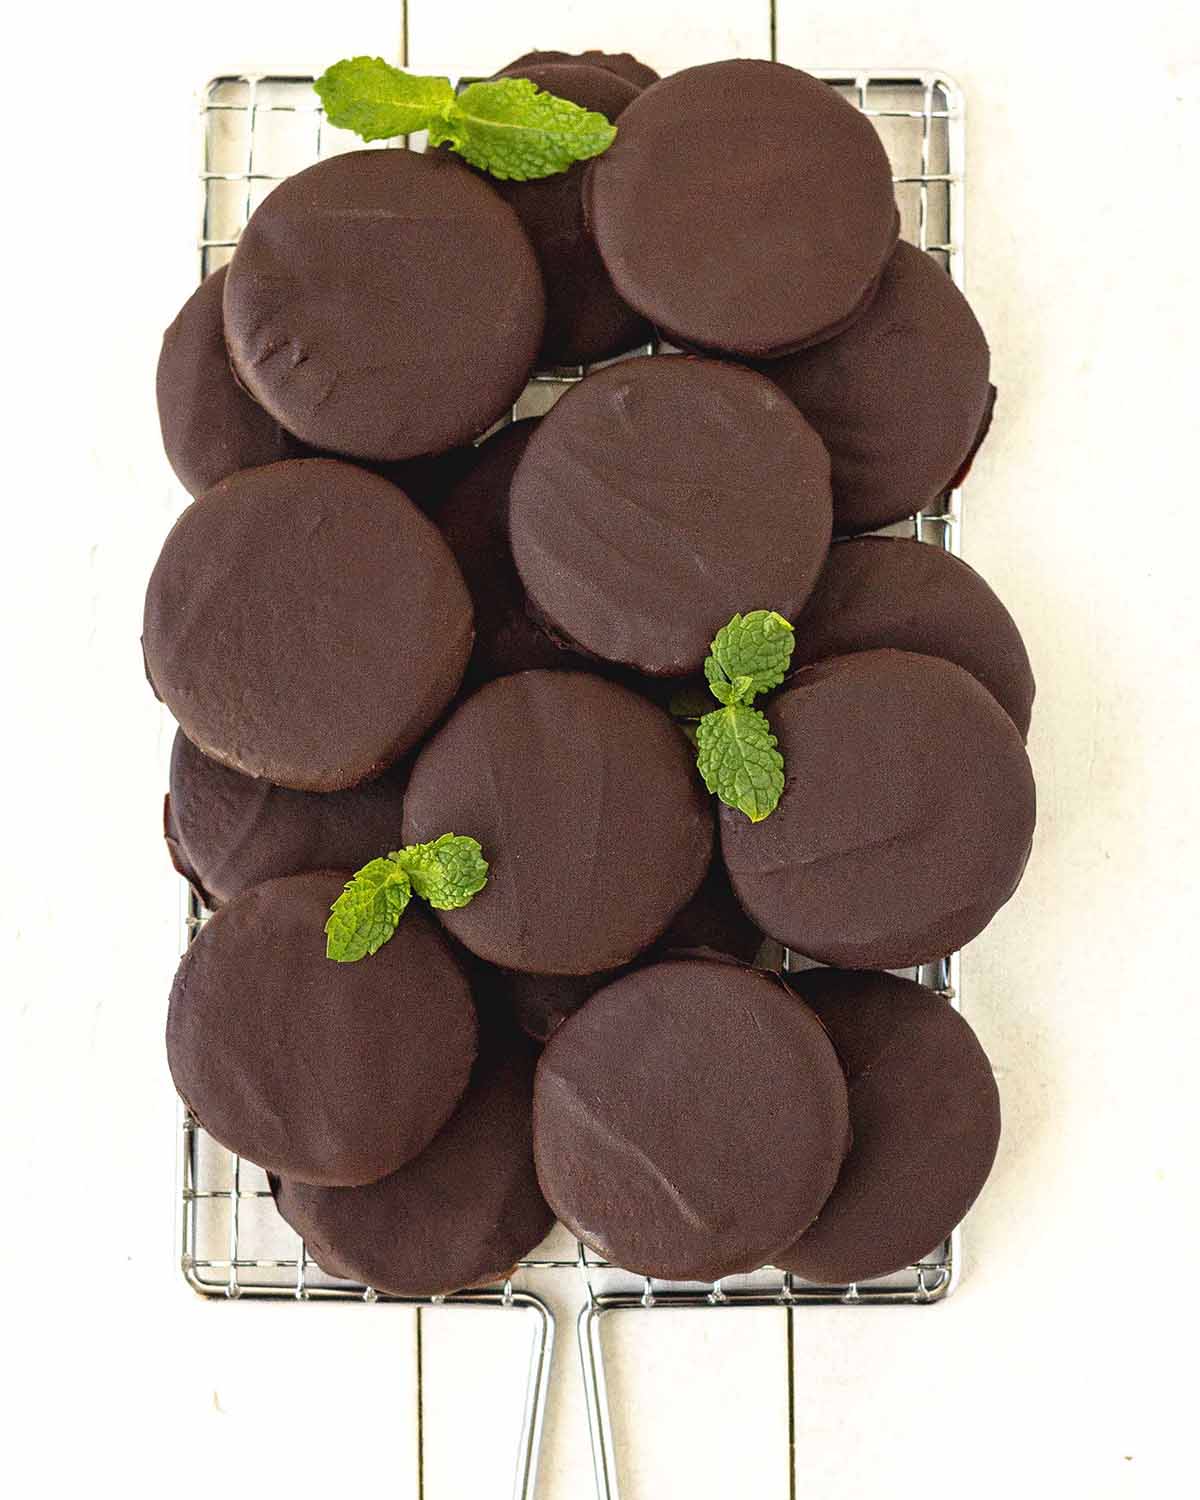 An overhead shot of gluten-free chocolate mint cookies sitting on a cooling rack, fresh mint leave are amongst the cookies.